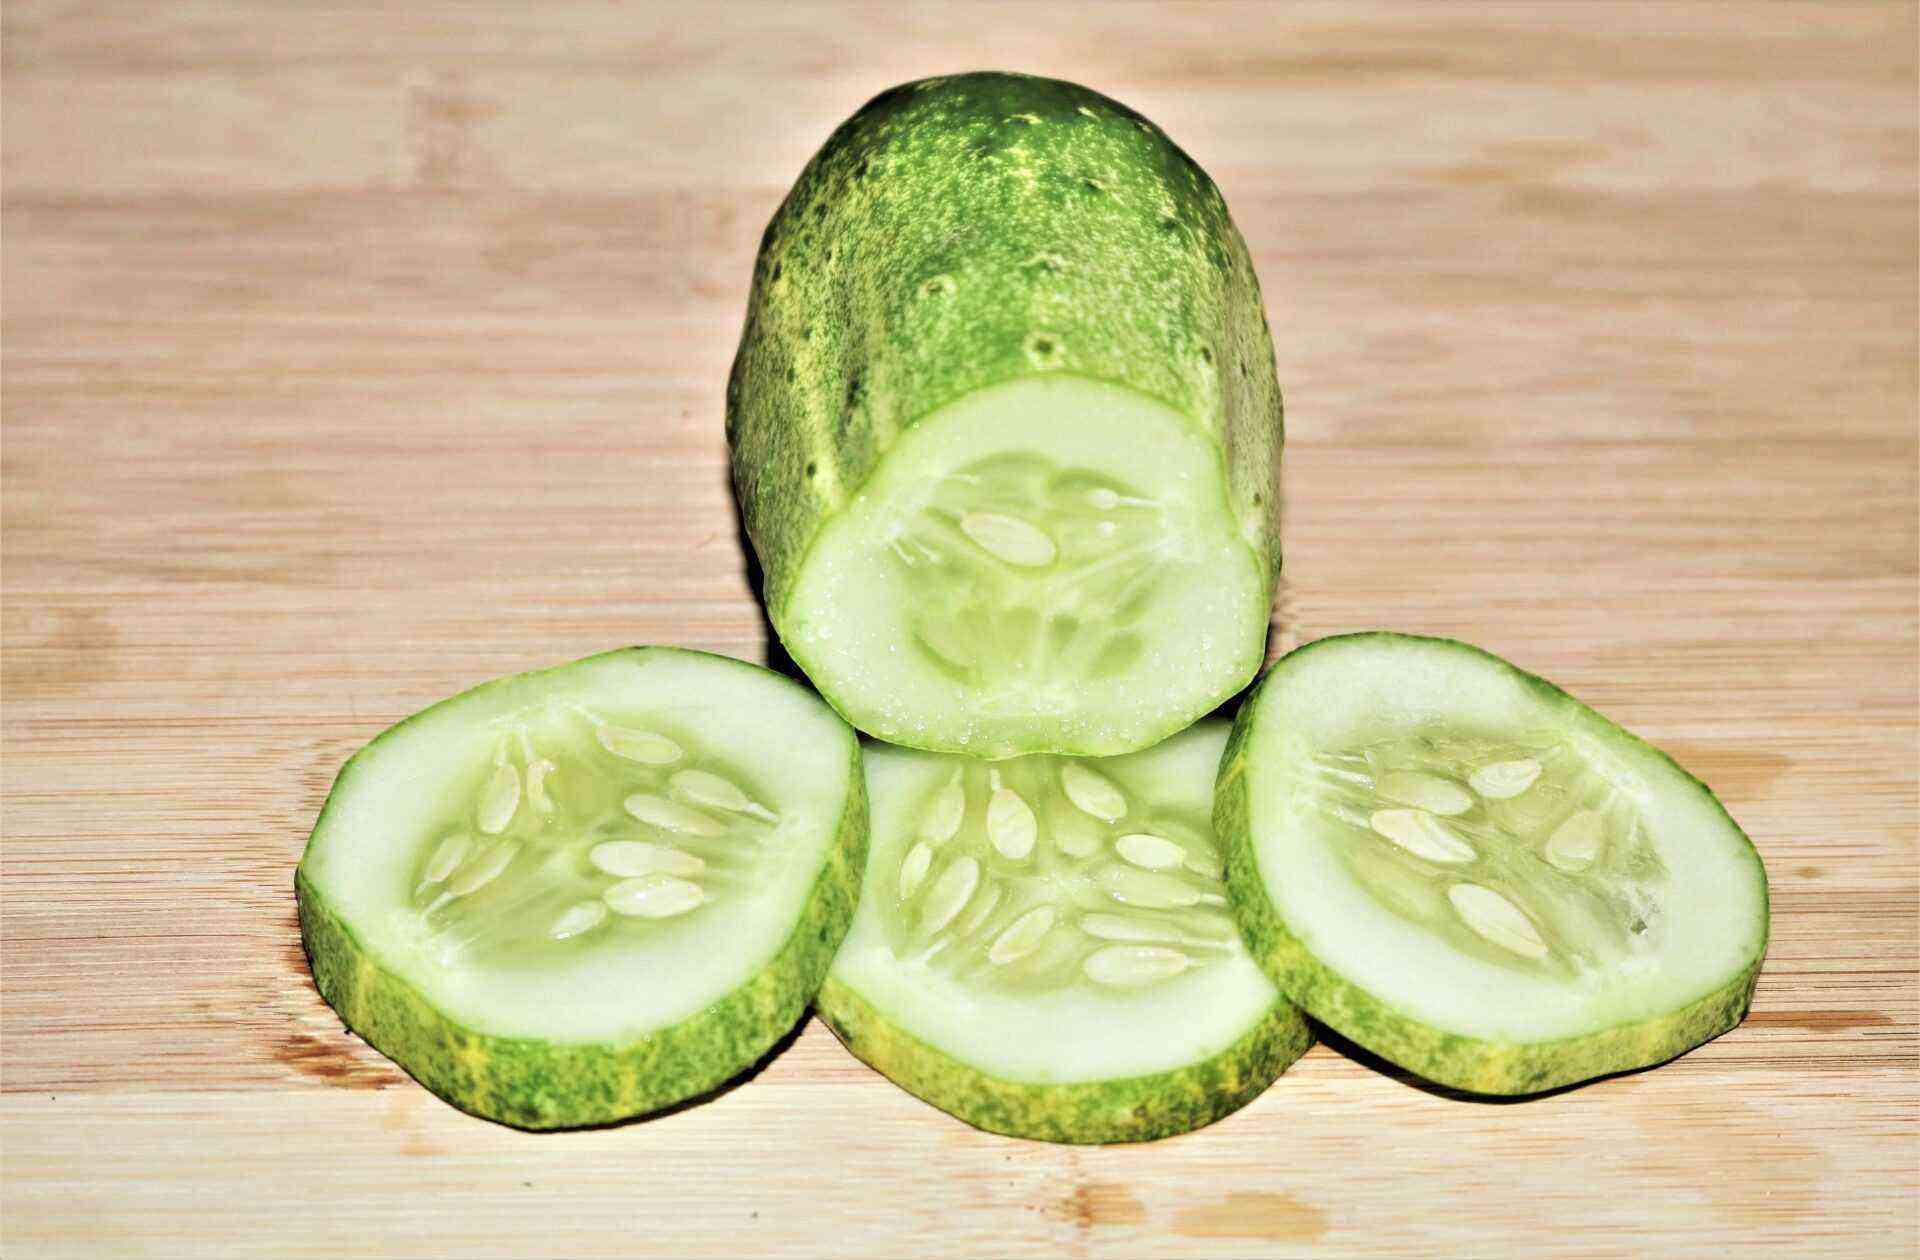 From which cucumber fruits – male or female – to choose seeds?